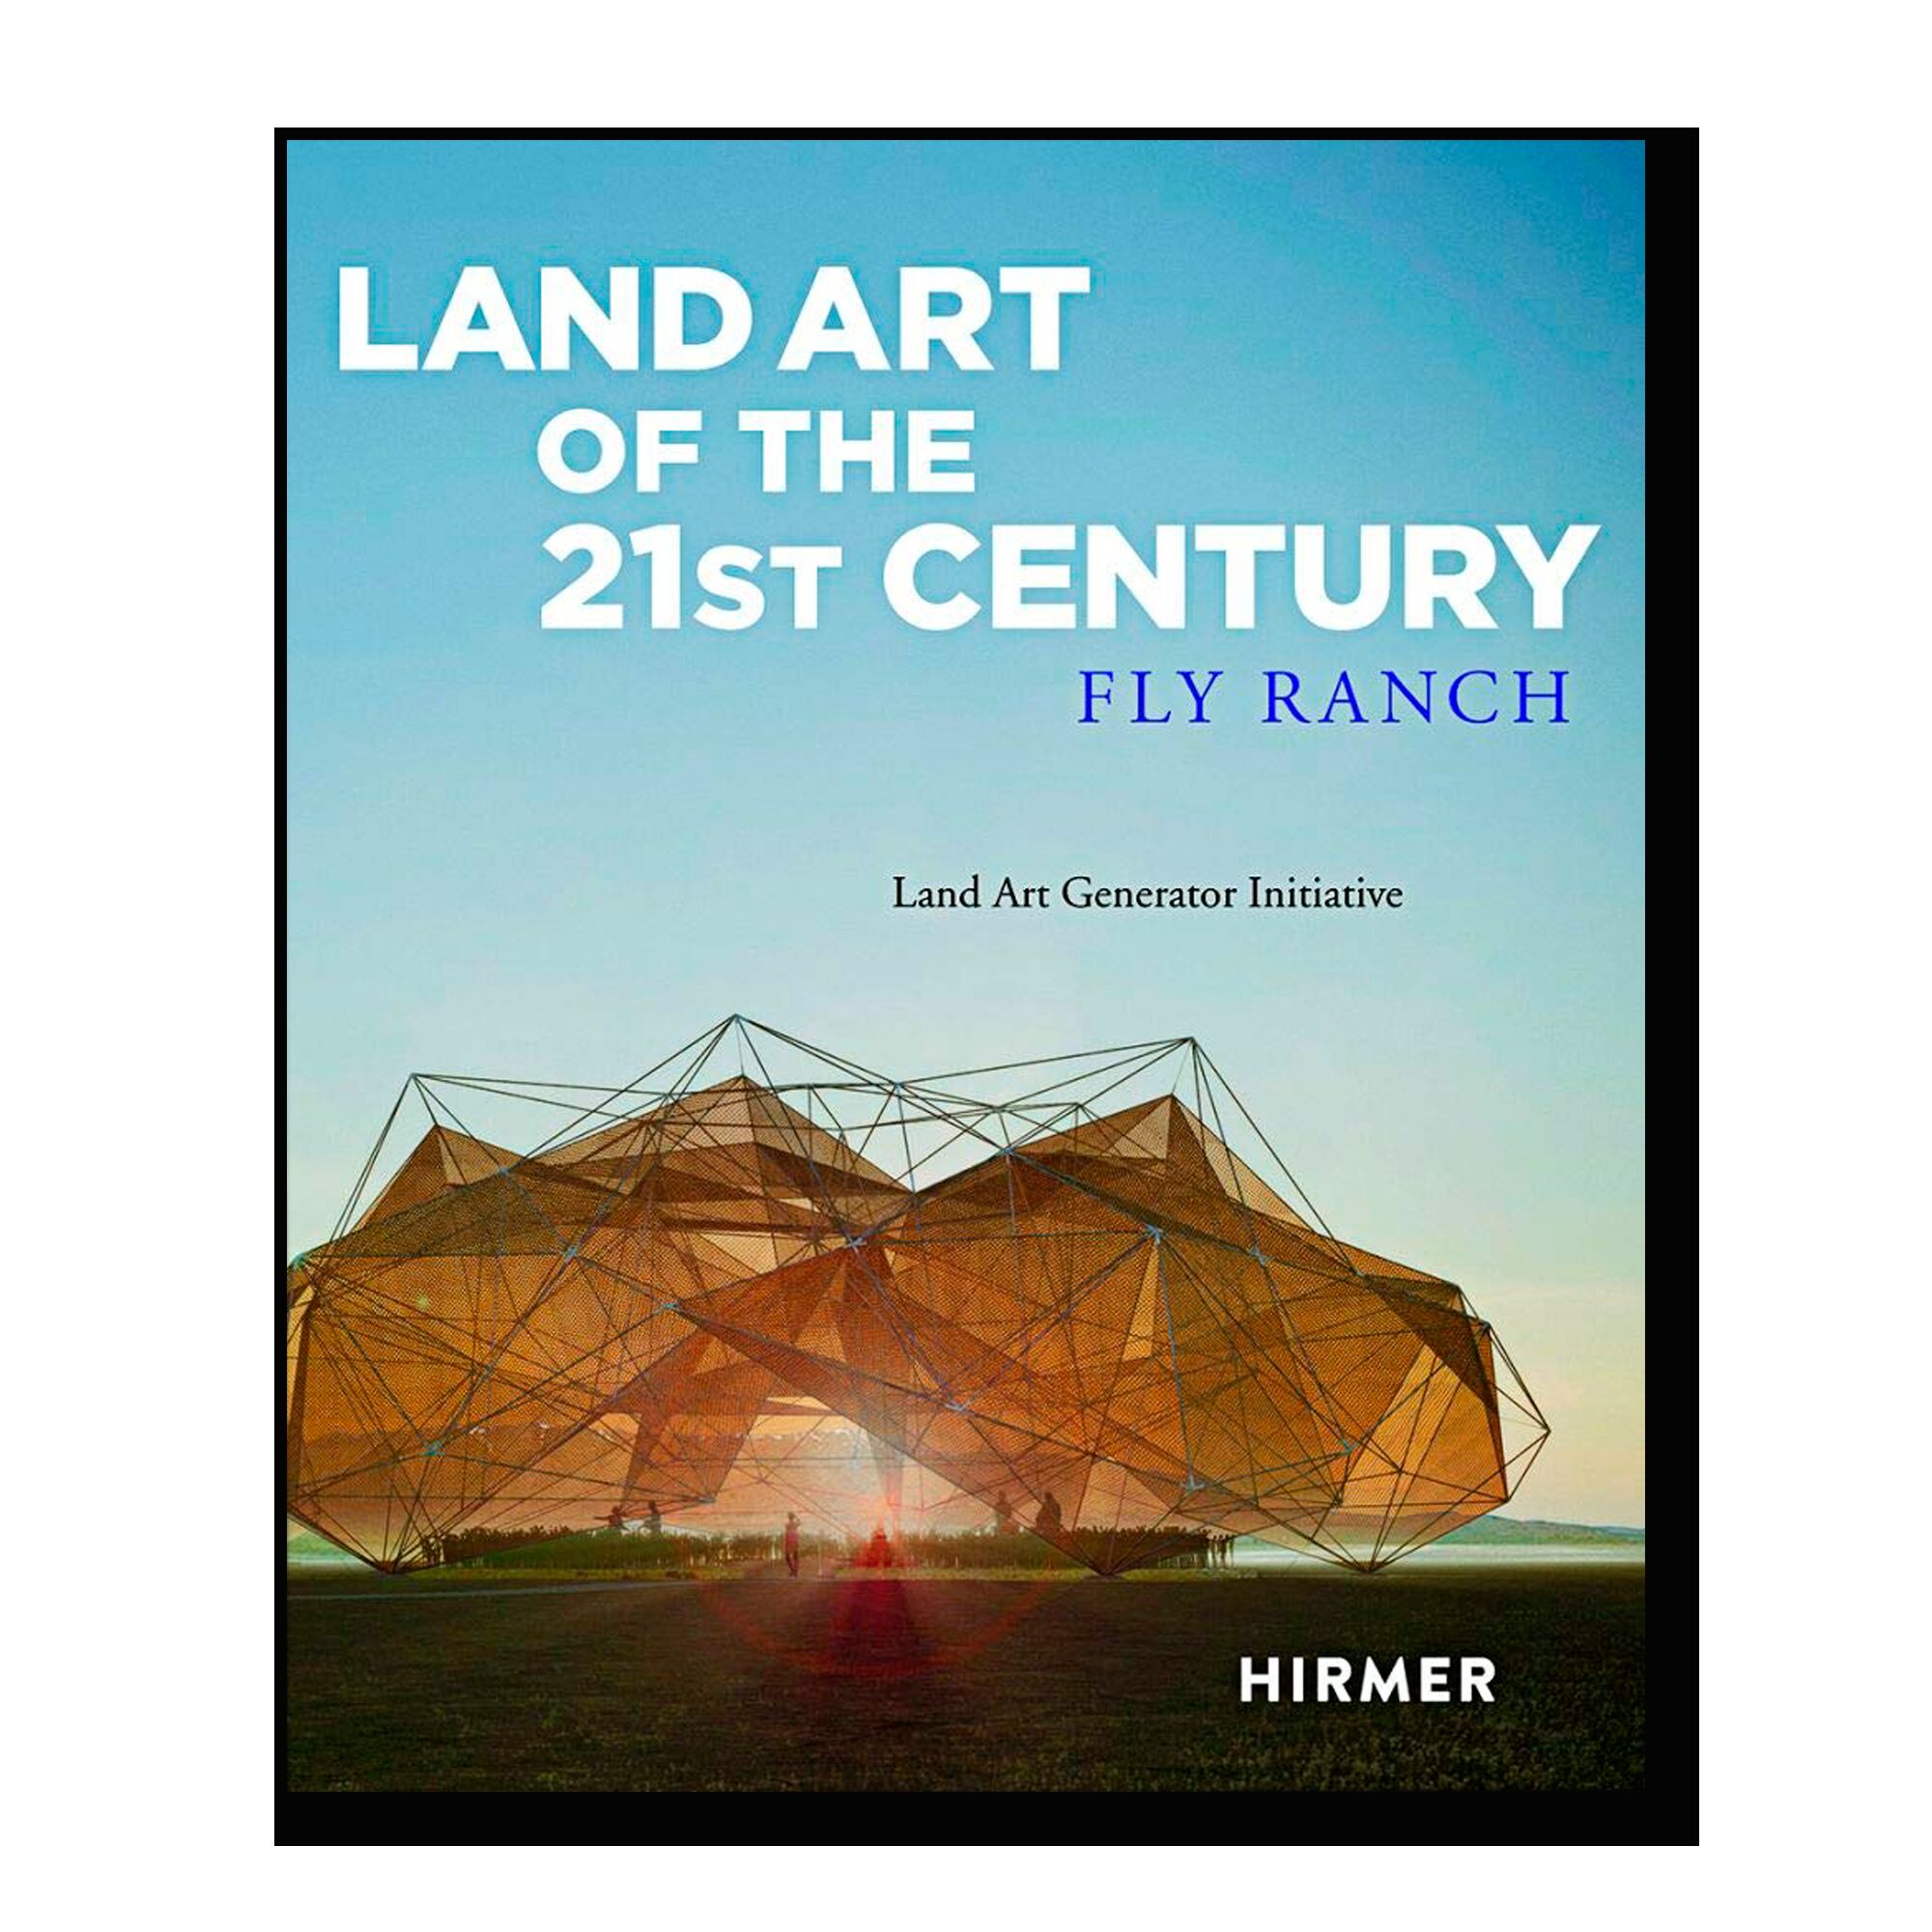 Land Art of the 21st Century: Land Art Generator Initiative at Fly Ranch